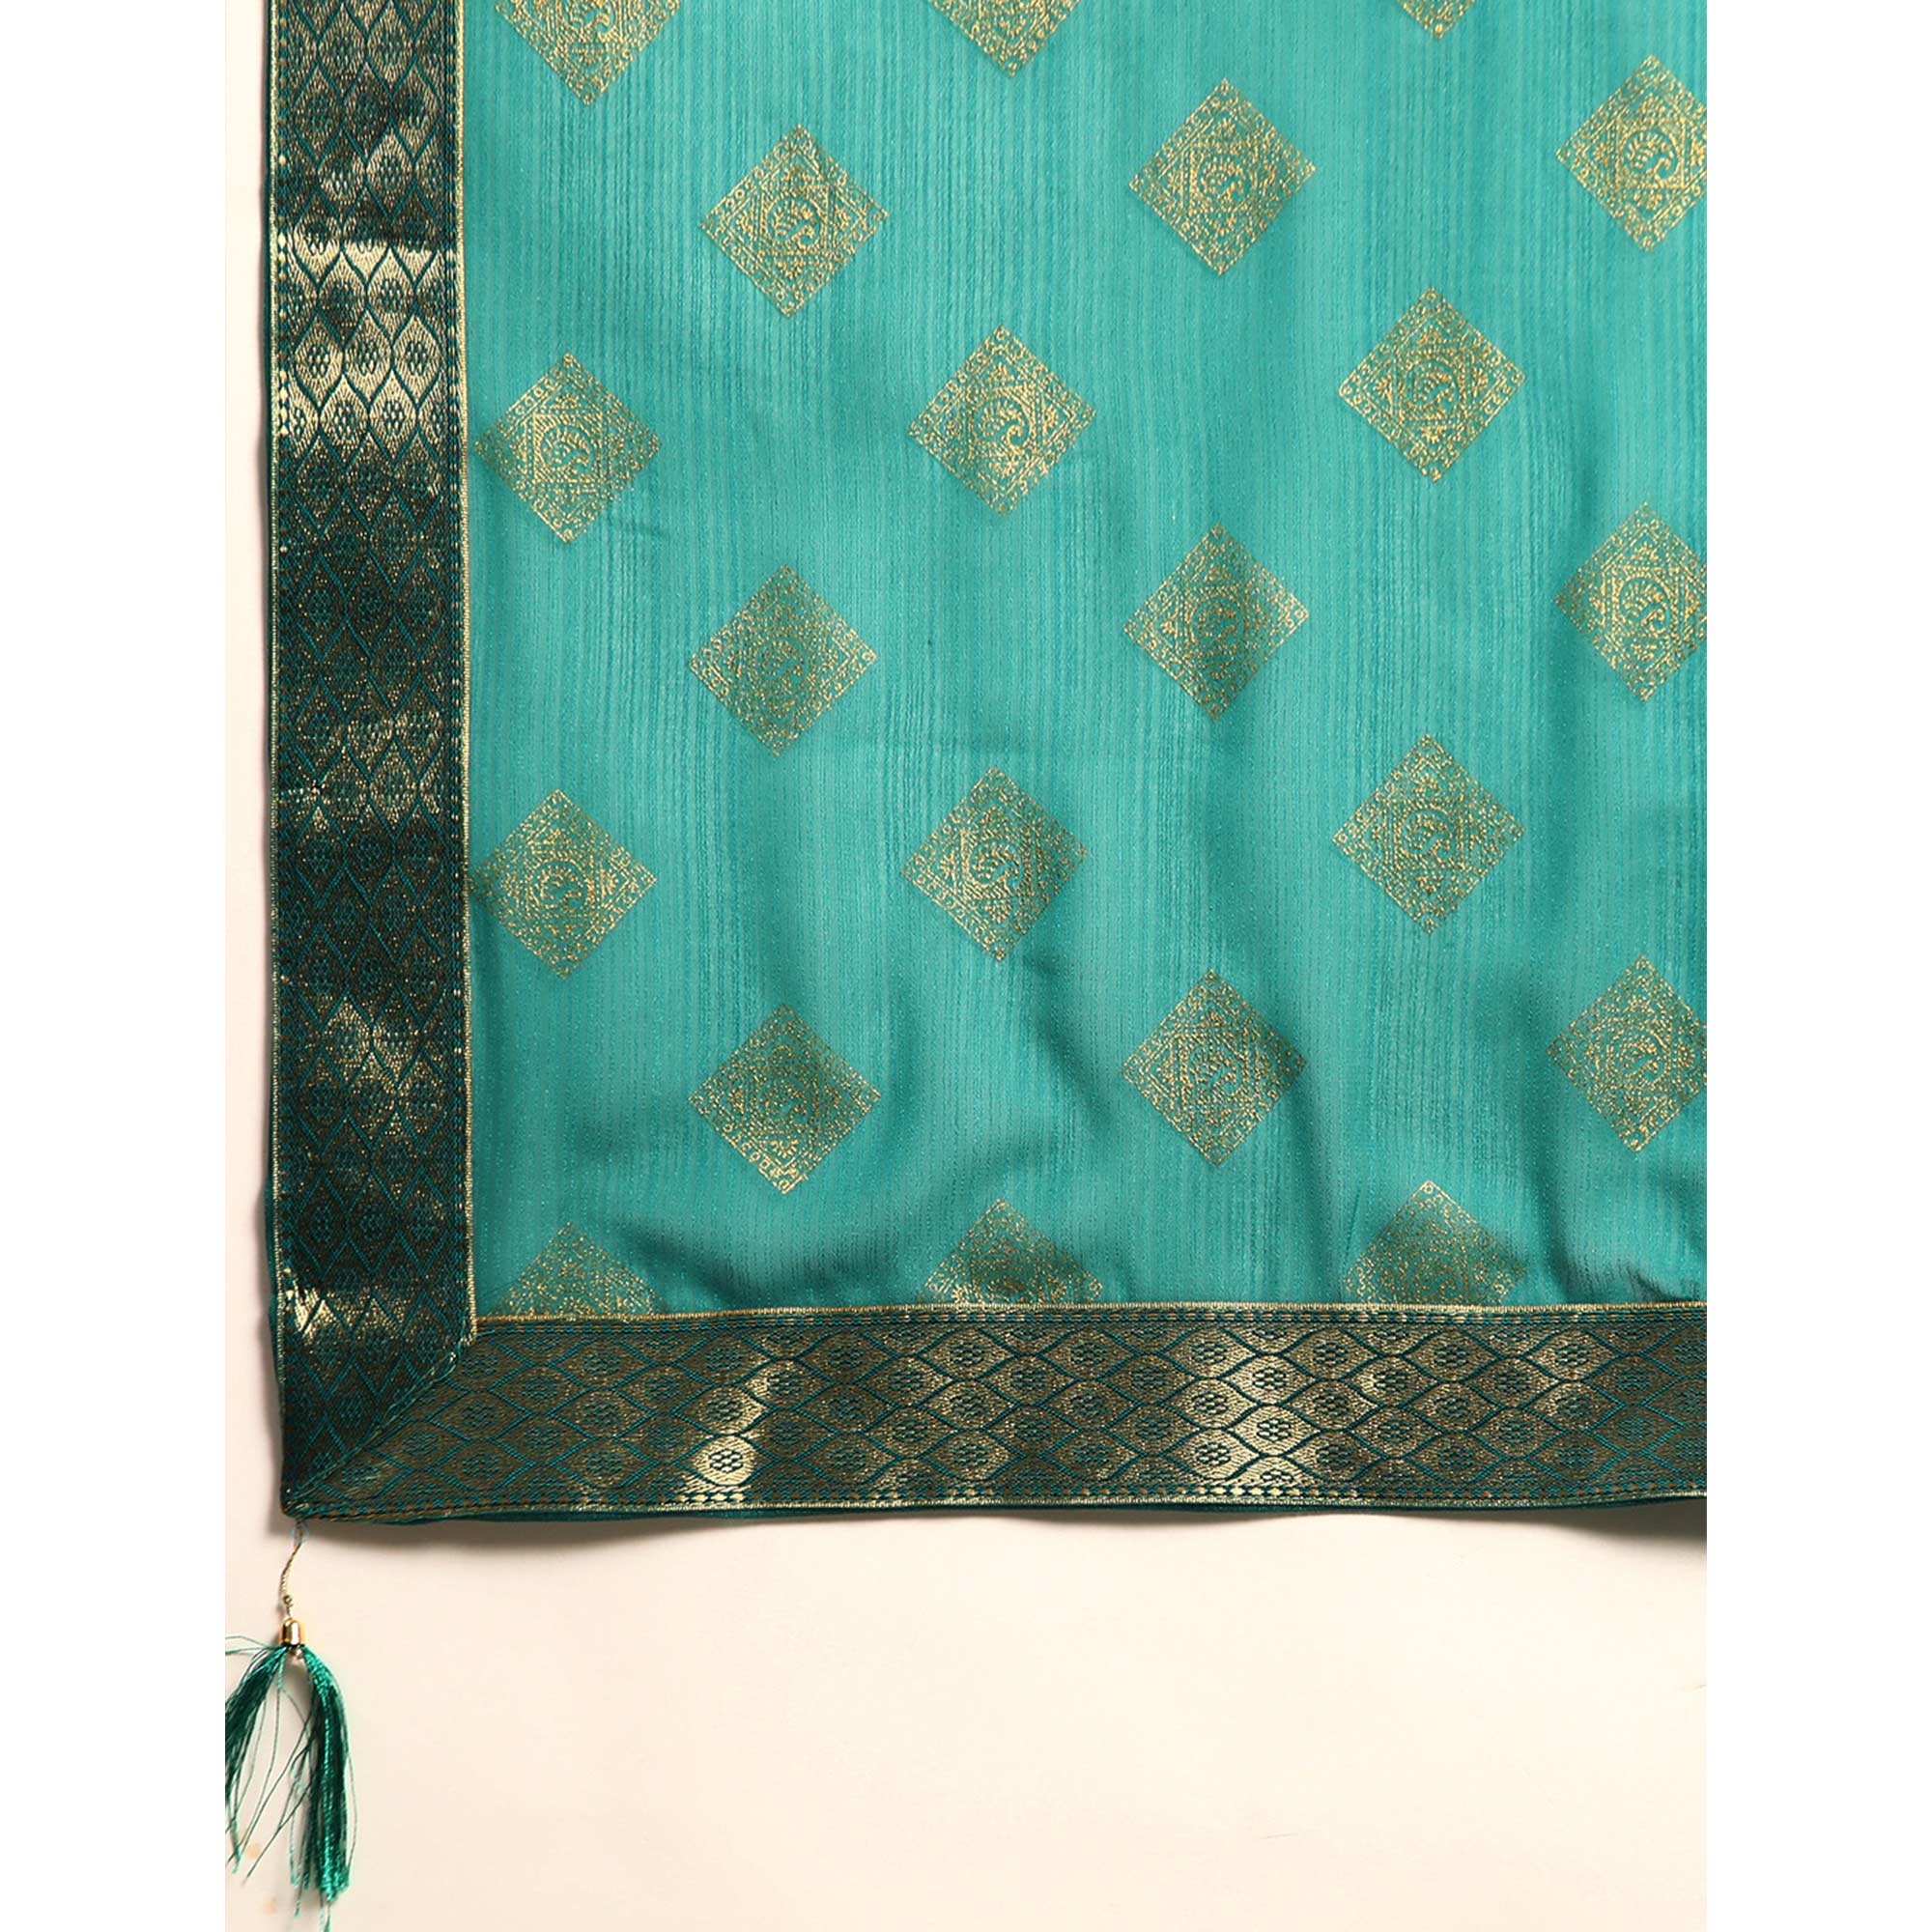 Turquoise Green Foil Printed Chiffon Saree With Tassels